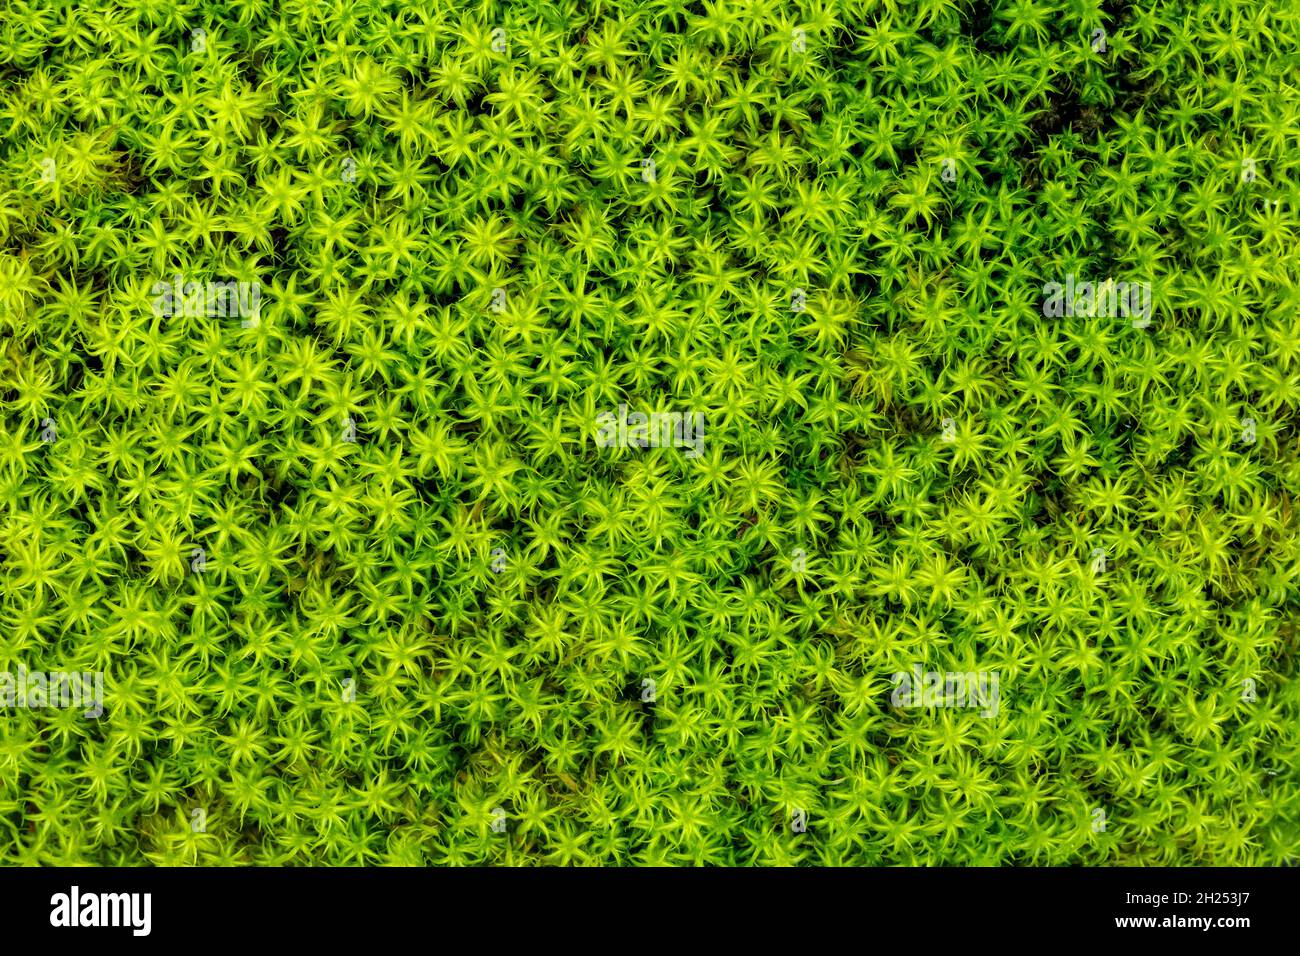 Beautiful natural background of green grasses. Ecology and nature concept. Stock Photo